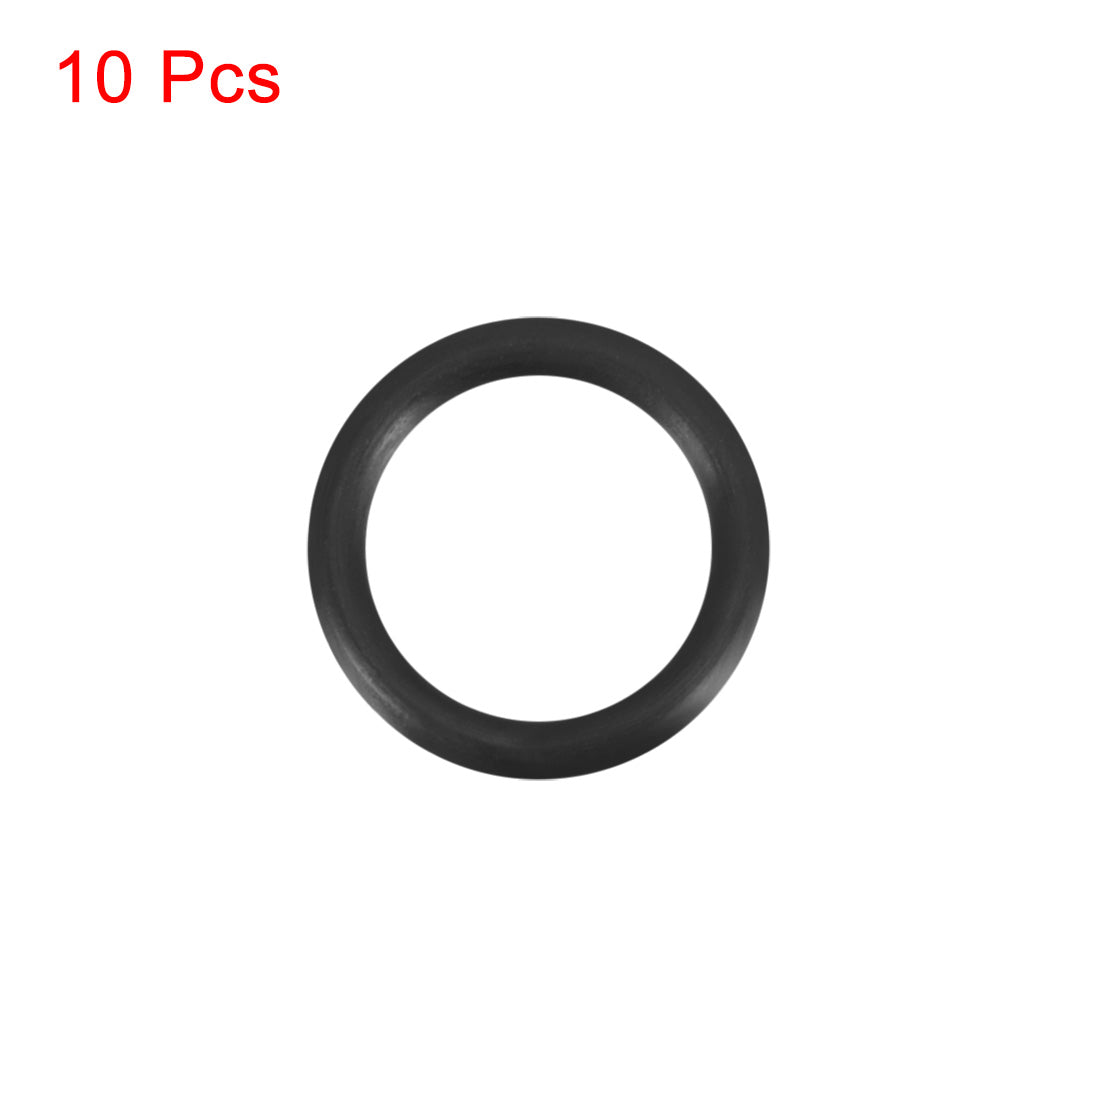 uxcell Uxcell O-Rings Nitrile Rubber 12mm x 16mm x 2mm Seal Rings Sealing Gasket 10pcs